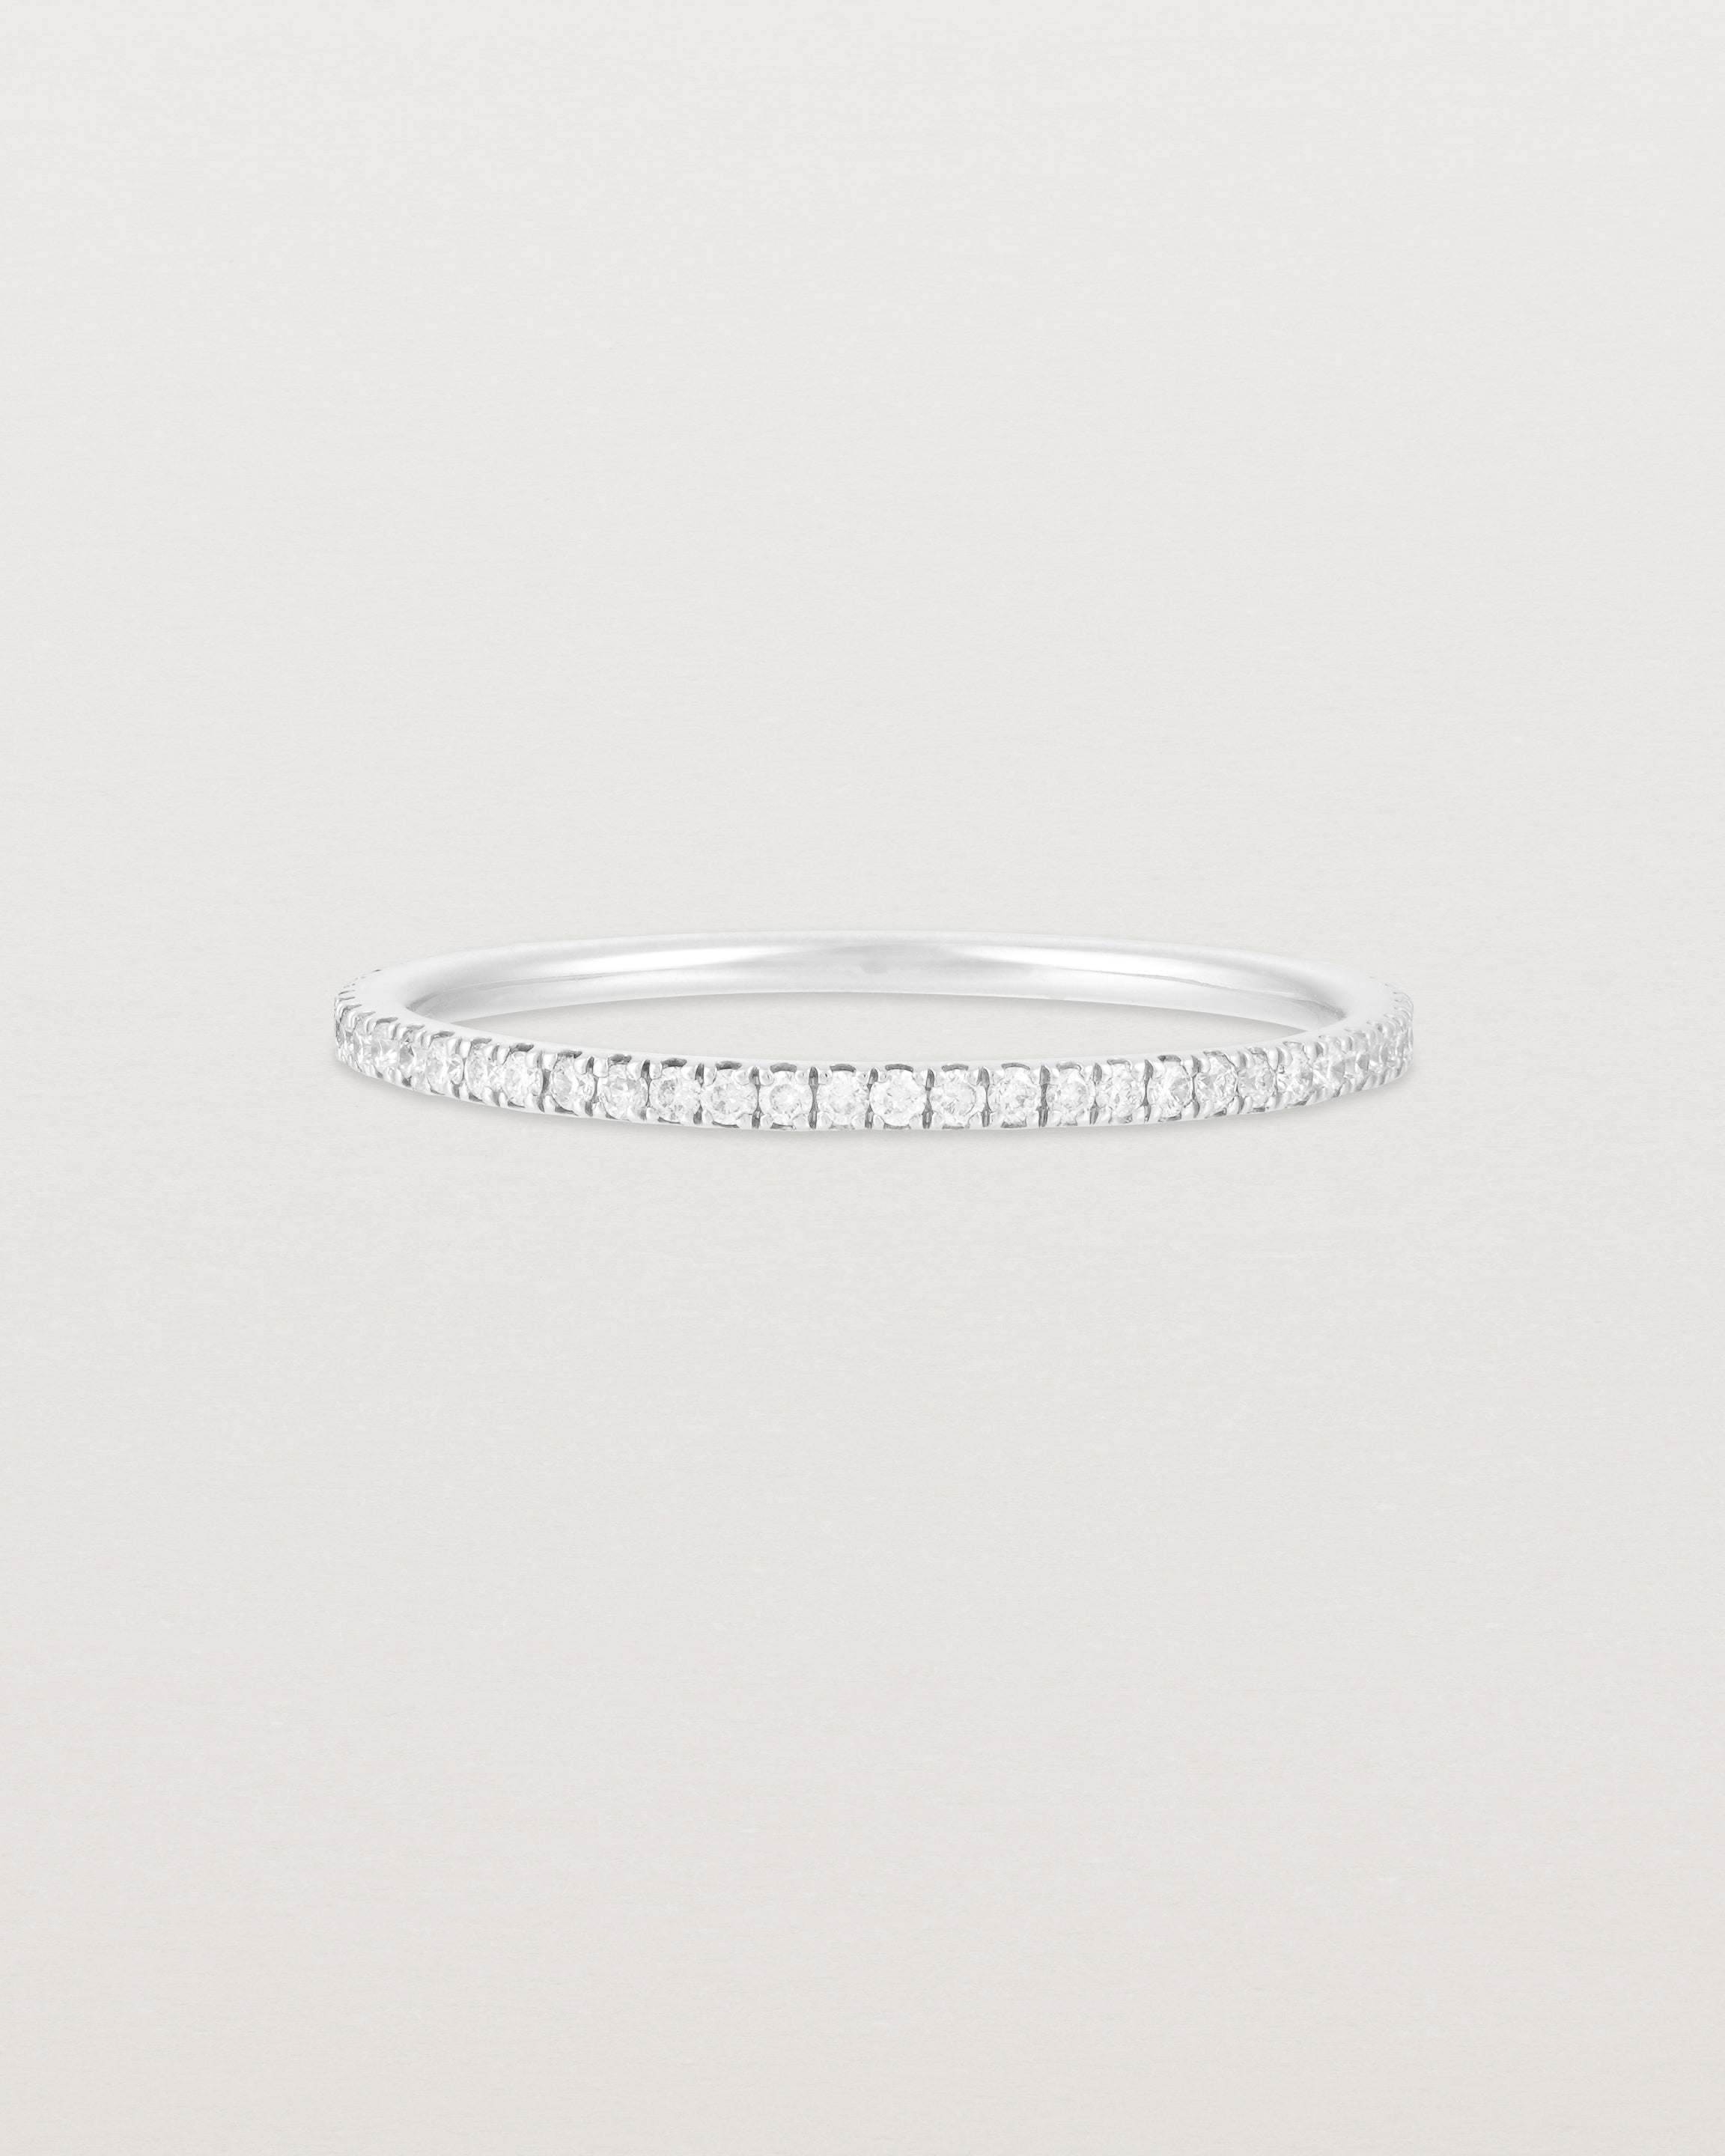 A full white gold band featuring white diamonds